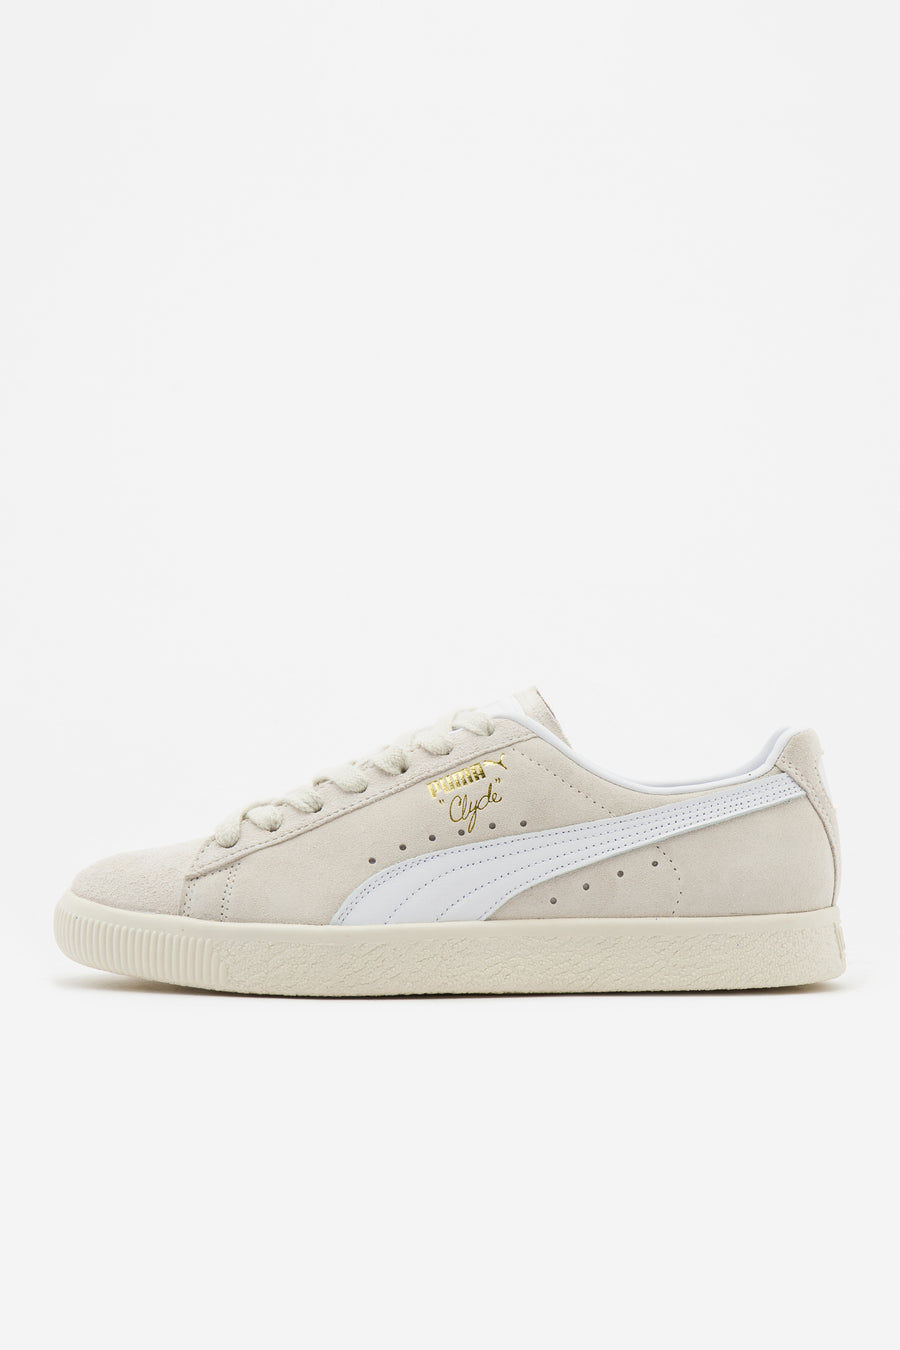 PUMA Men's Clyde Premium Sneaker Frosted Ivory/White - Notre